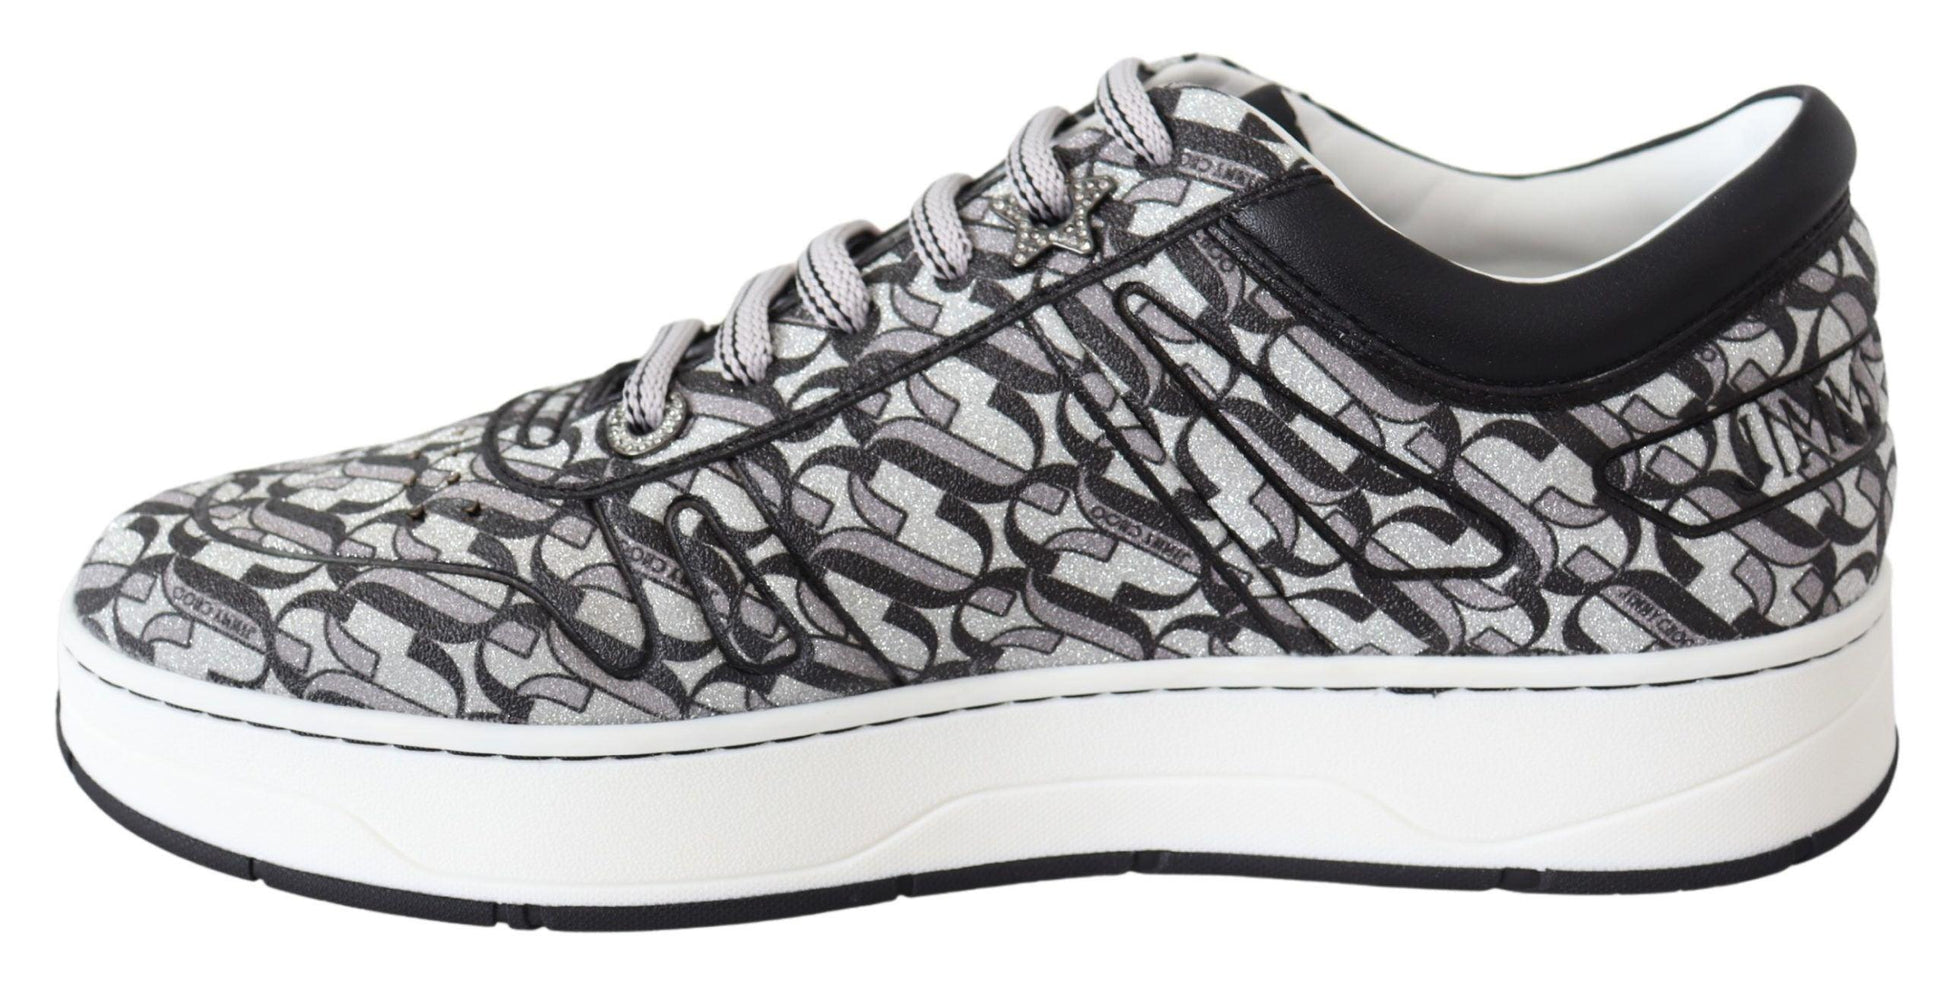 Jimmy Choo Women's Silver Black Glitter Hawaii Sneakers - Designed by Jimmy Choo Available to Buy at a Discounted Price on Moon Behind The Hill Online Designer Discount Store